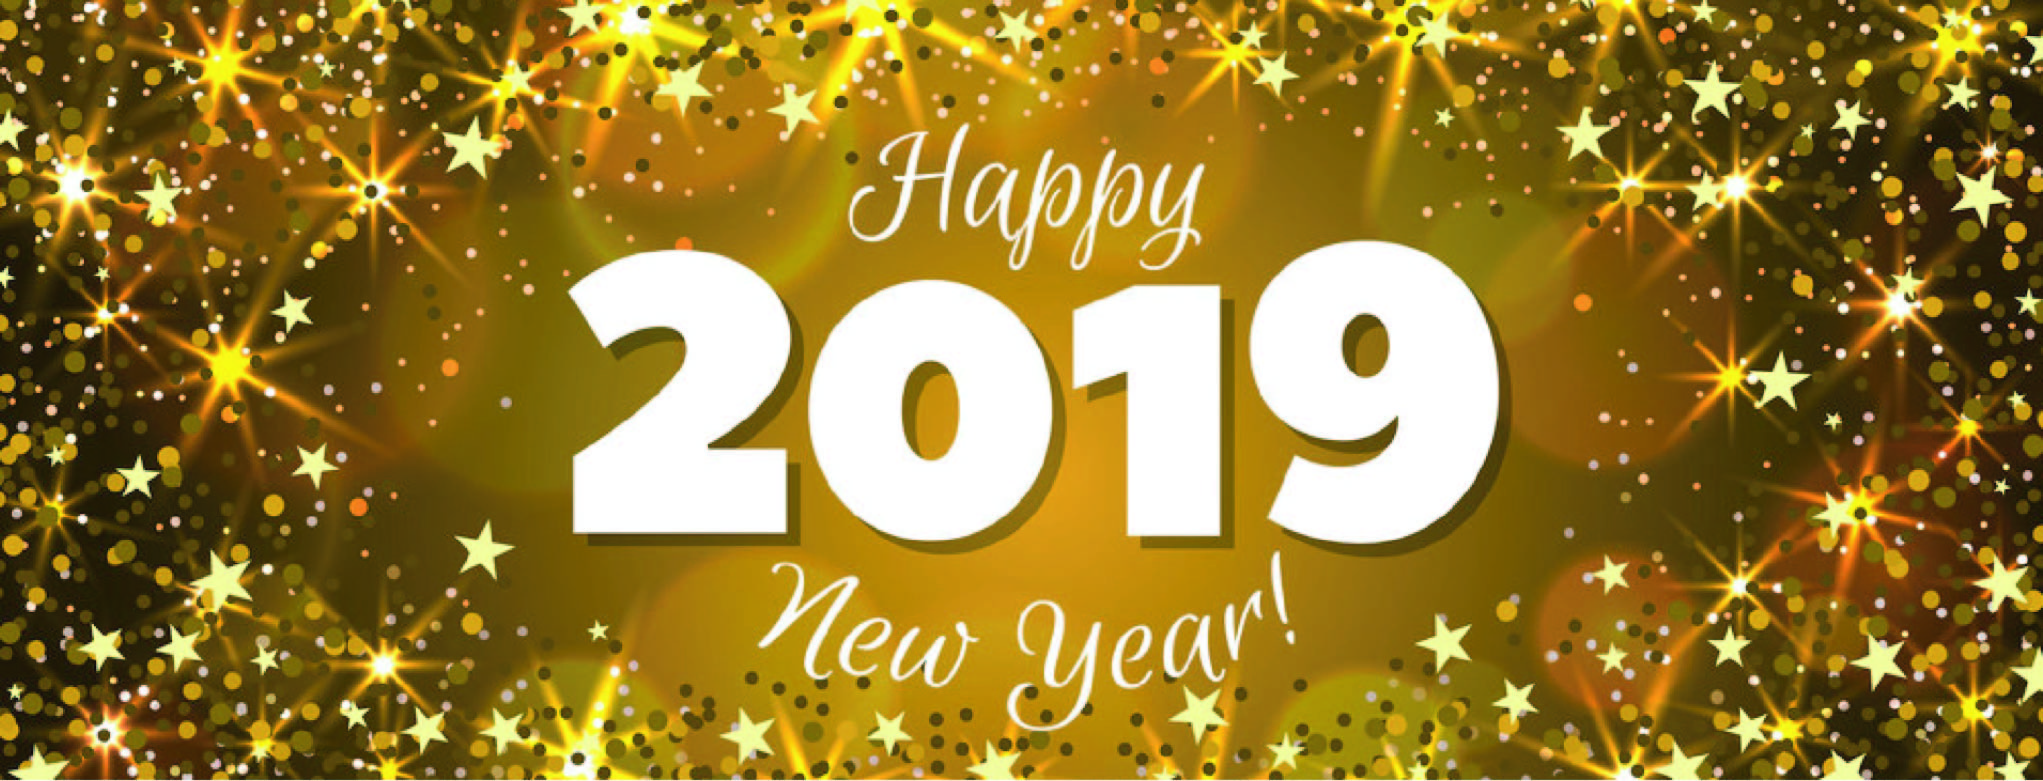 May the New Year bring all the good things in life you truly deserve. You had an amazing year already& you are going have another more amazing one! HAPPY NEW YEAR